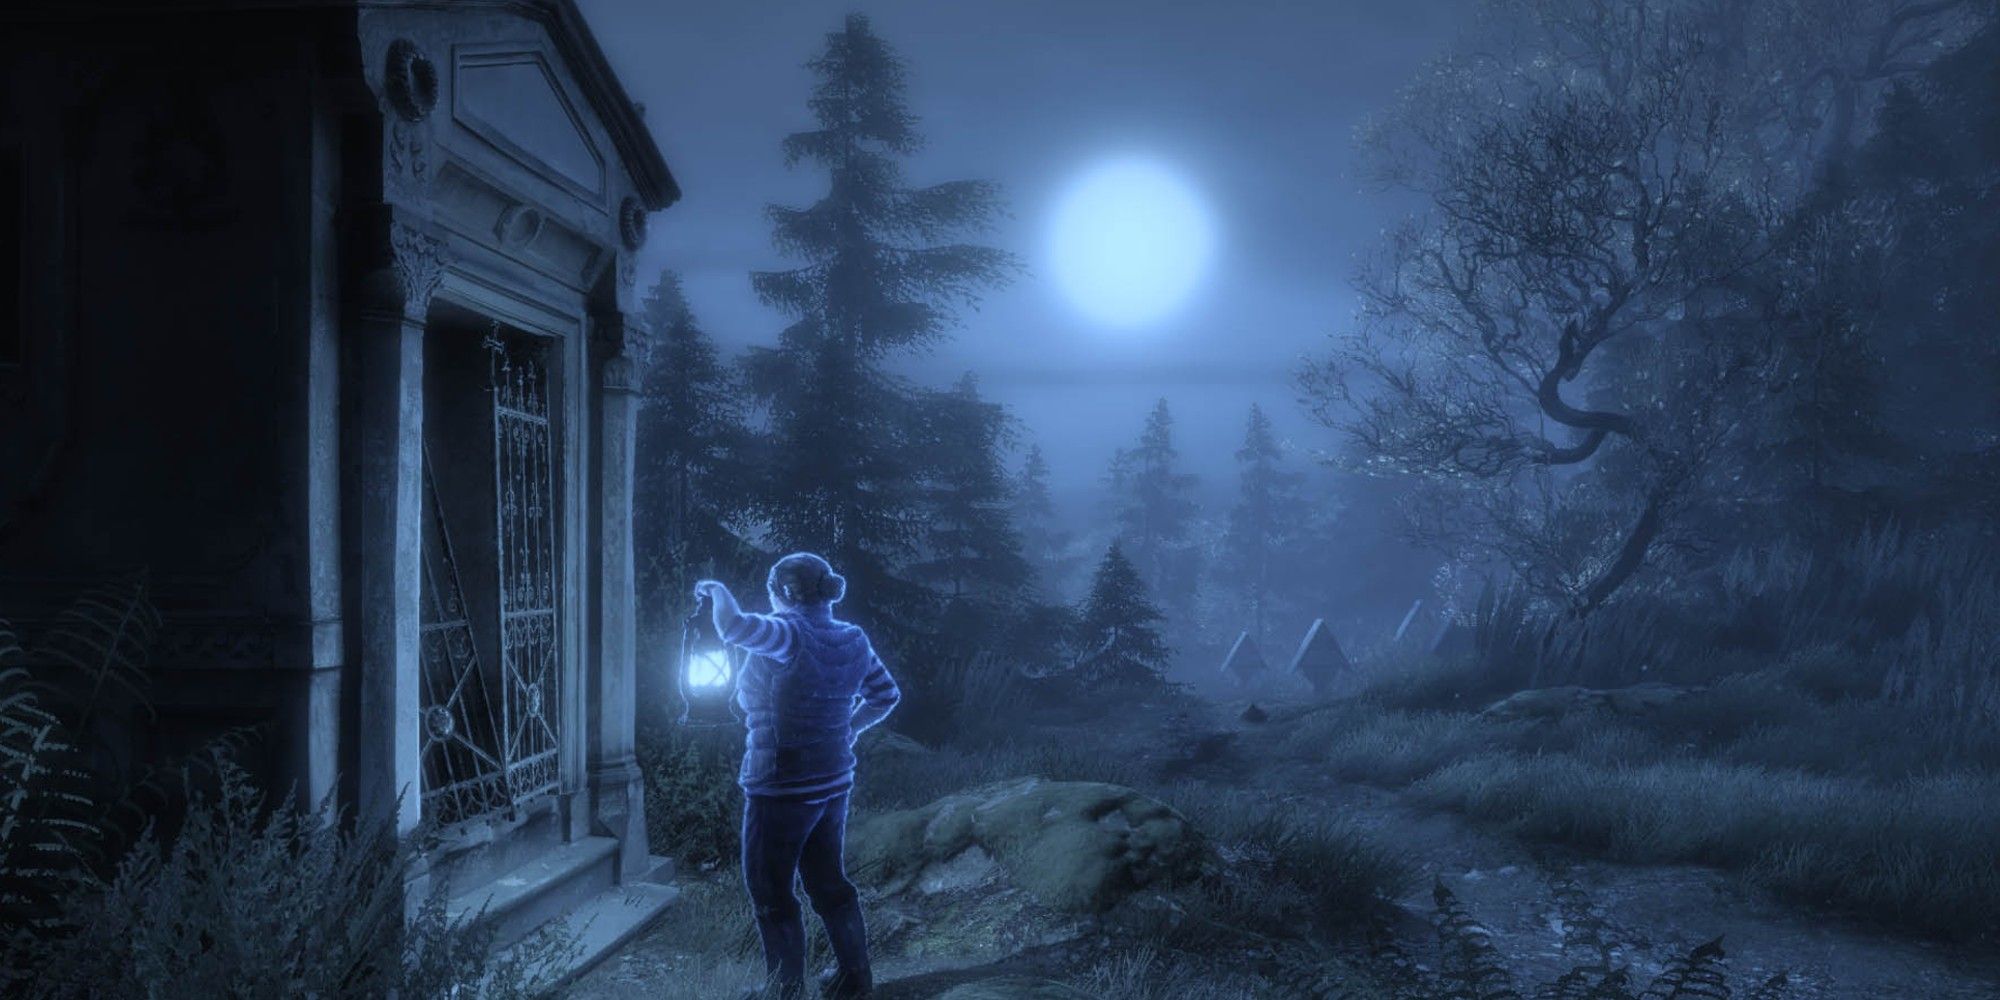 Ghostly figure holding a lantern in front of an old building in the moonlight. 